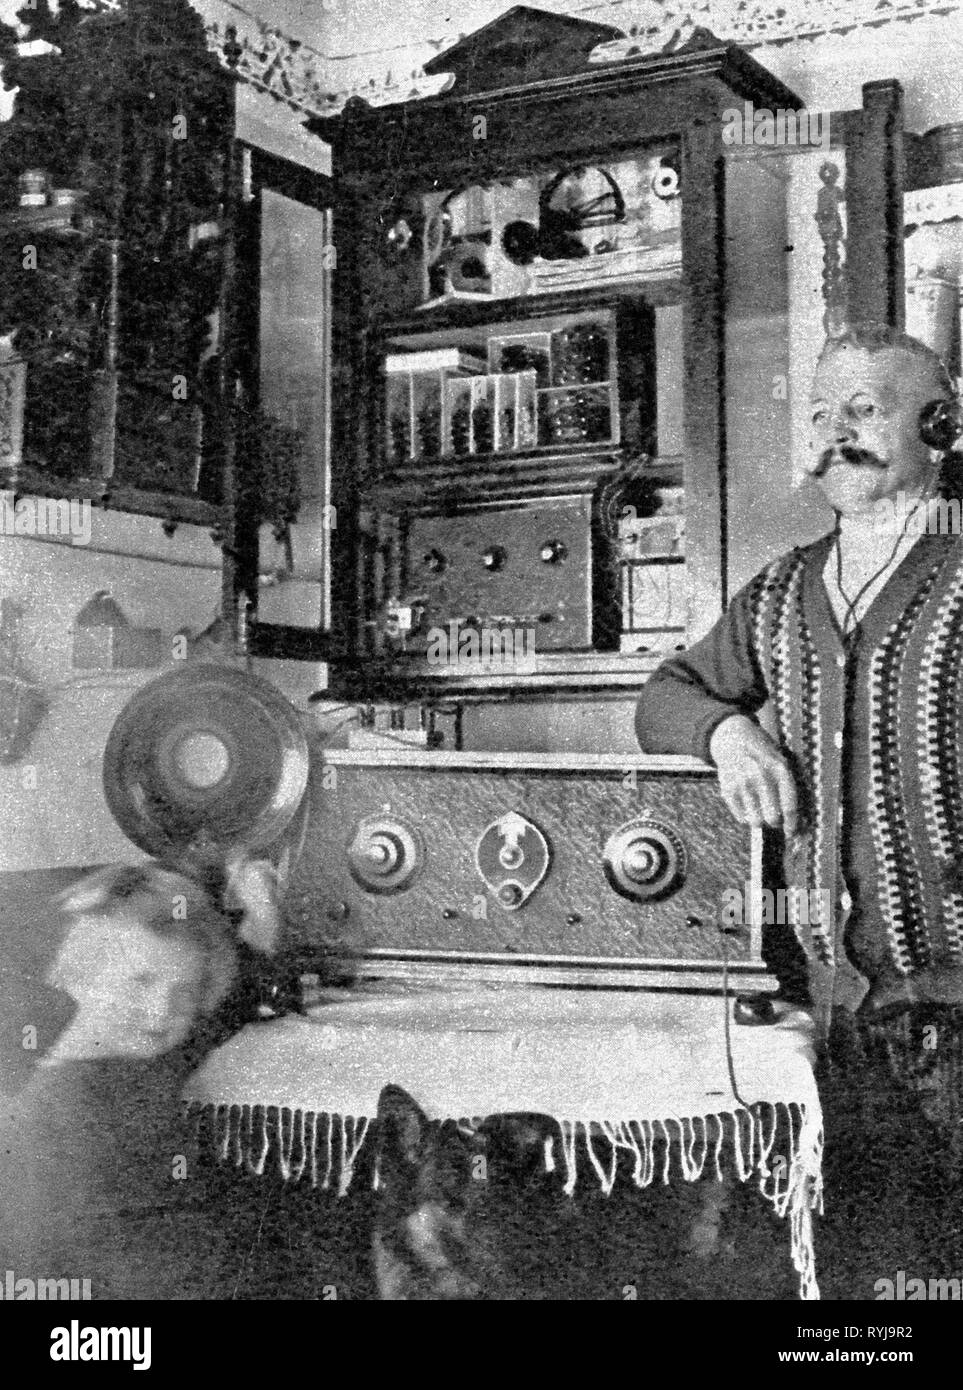 Broadcast, radio, juegos, self-made radio set, Alemania, 1929-Clearance-Info Additional-Rights-Not-Available Foto de stock